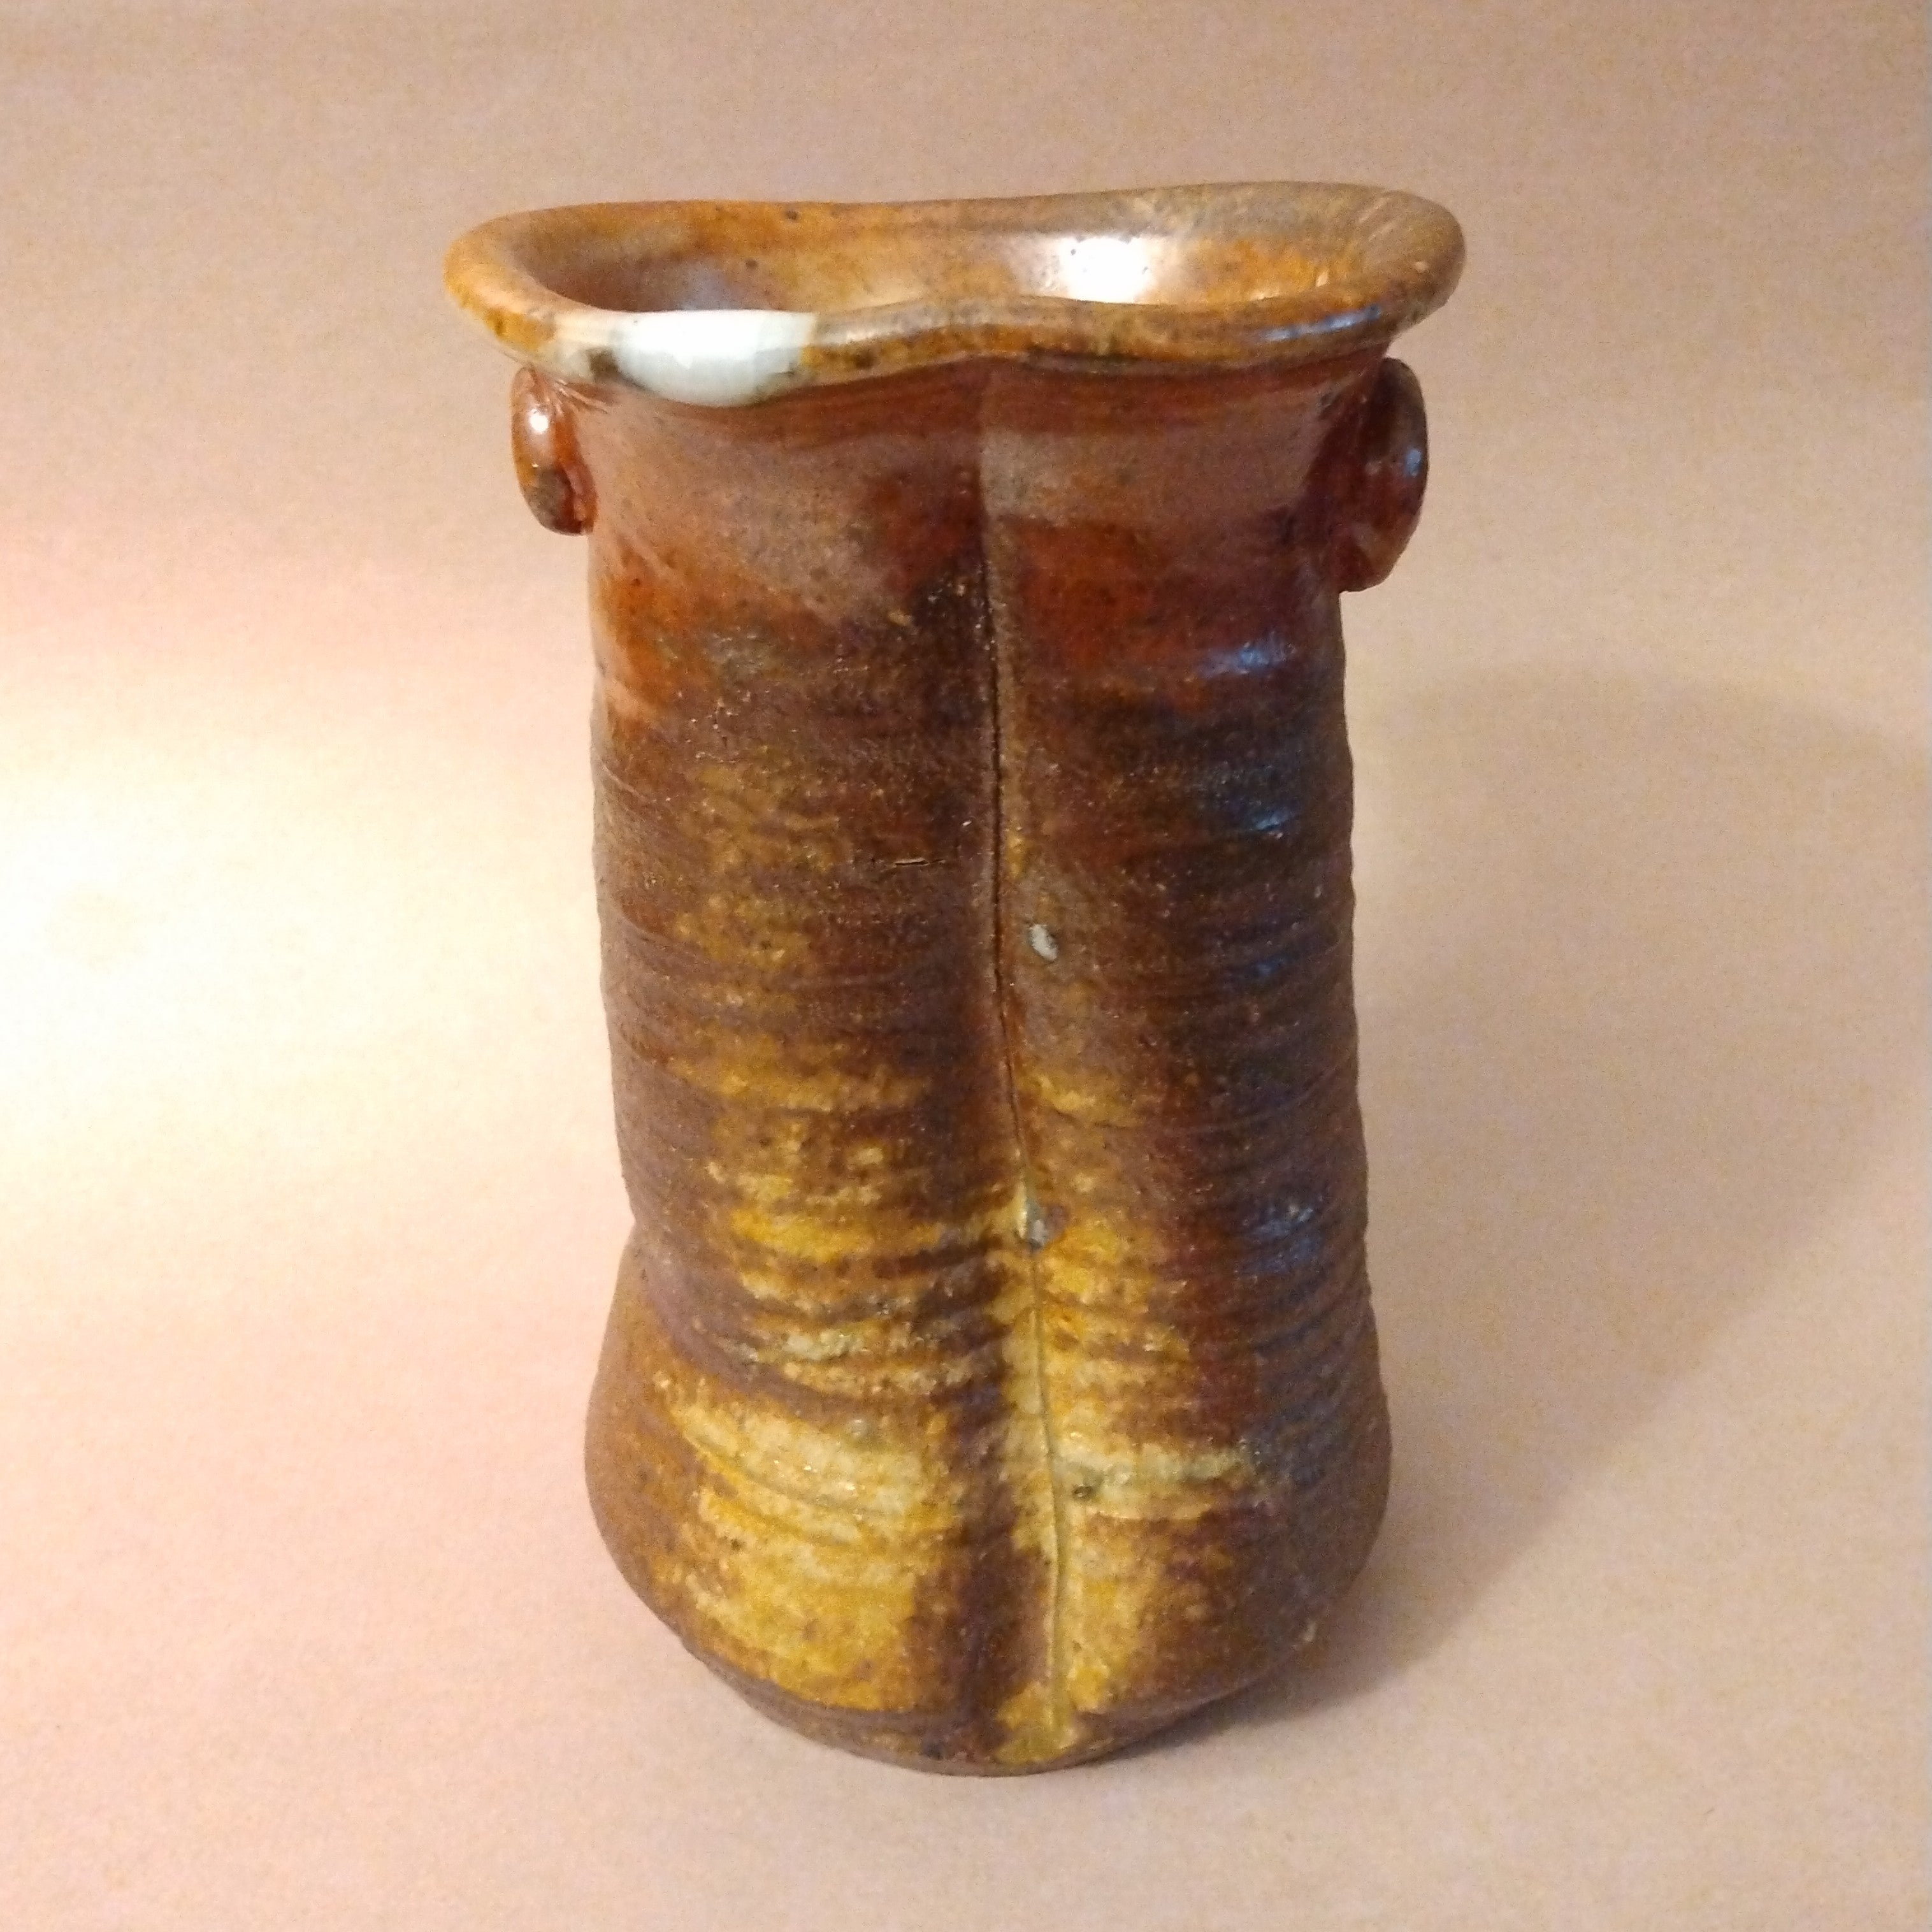 Wood-fired Vase with Ash Glaze, by George Gledhill